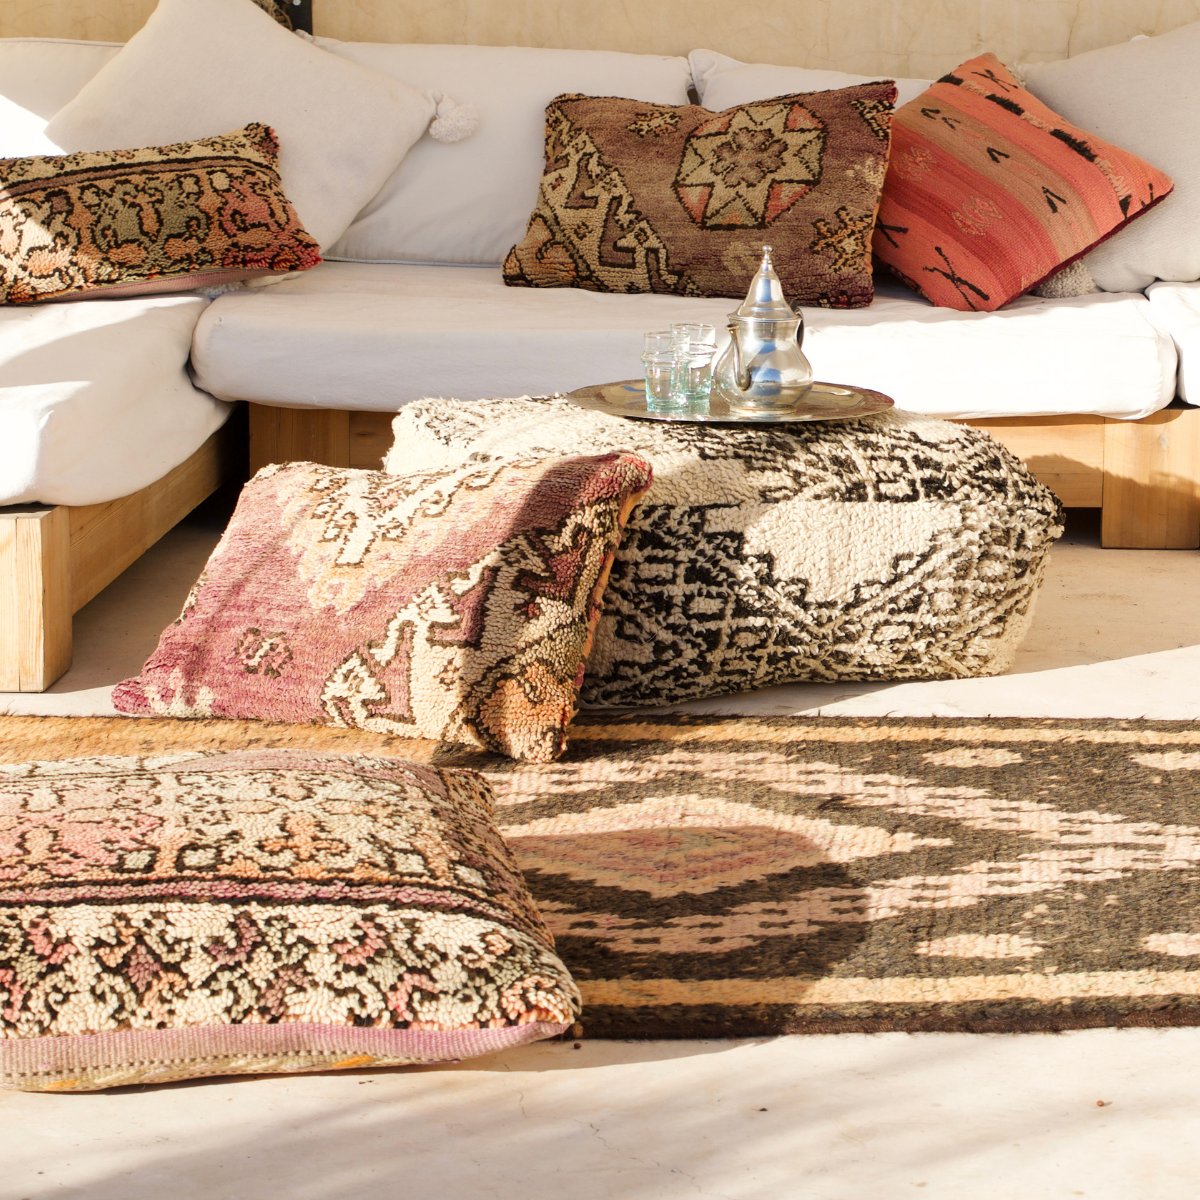 Vintage Moroccan cushions and floor cushions scattered on the ground - Nouvelle Nomad